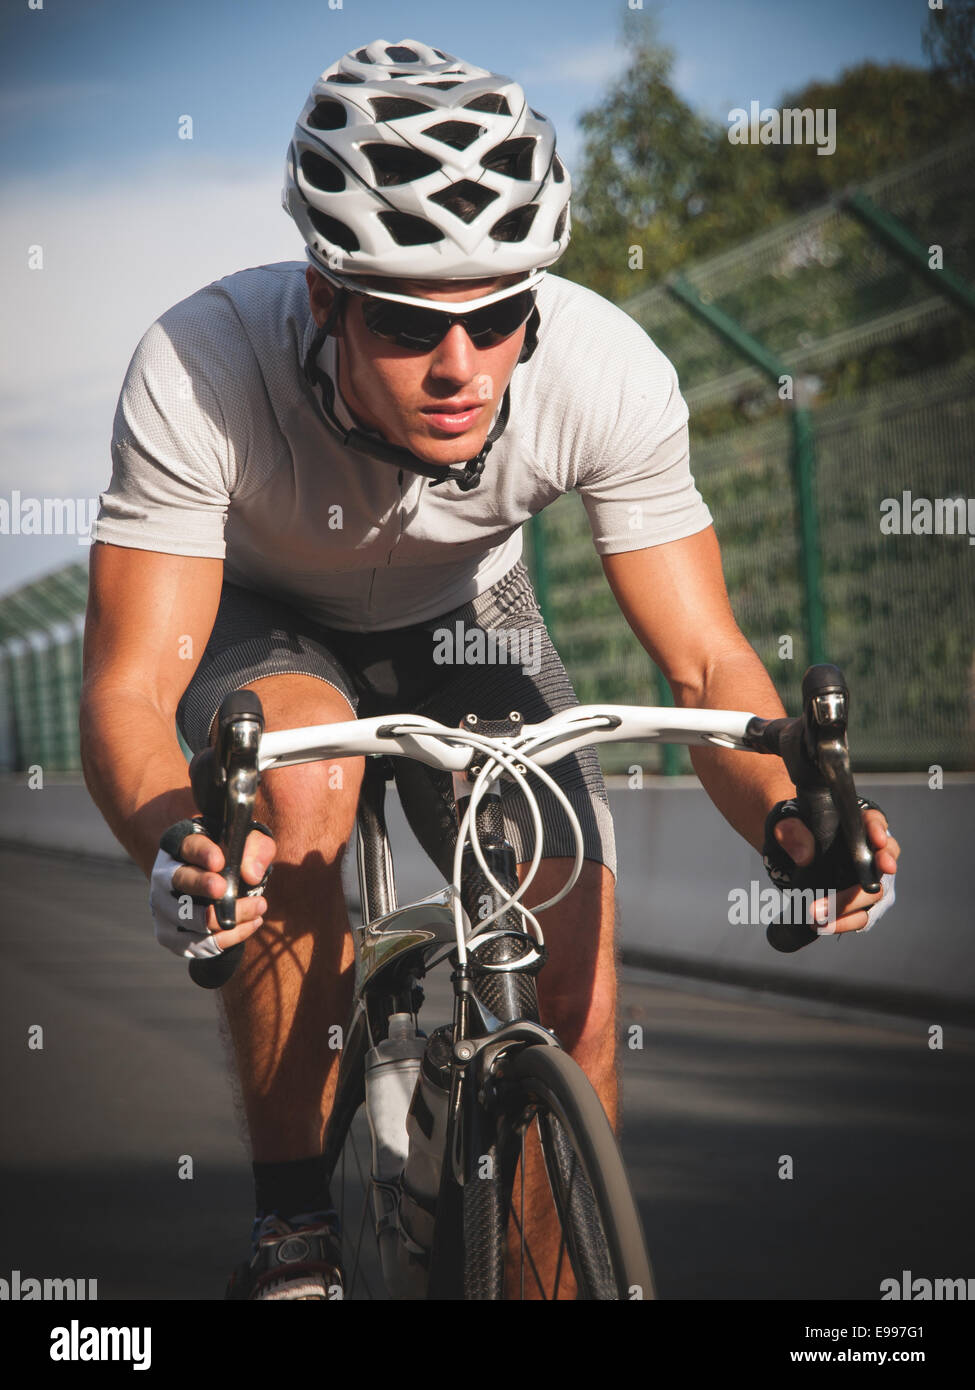 Cyclist portrait in action on the road in a sunny day. Stock Photo